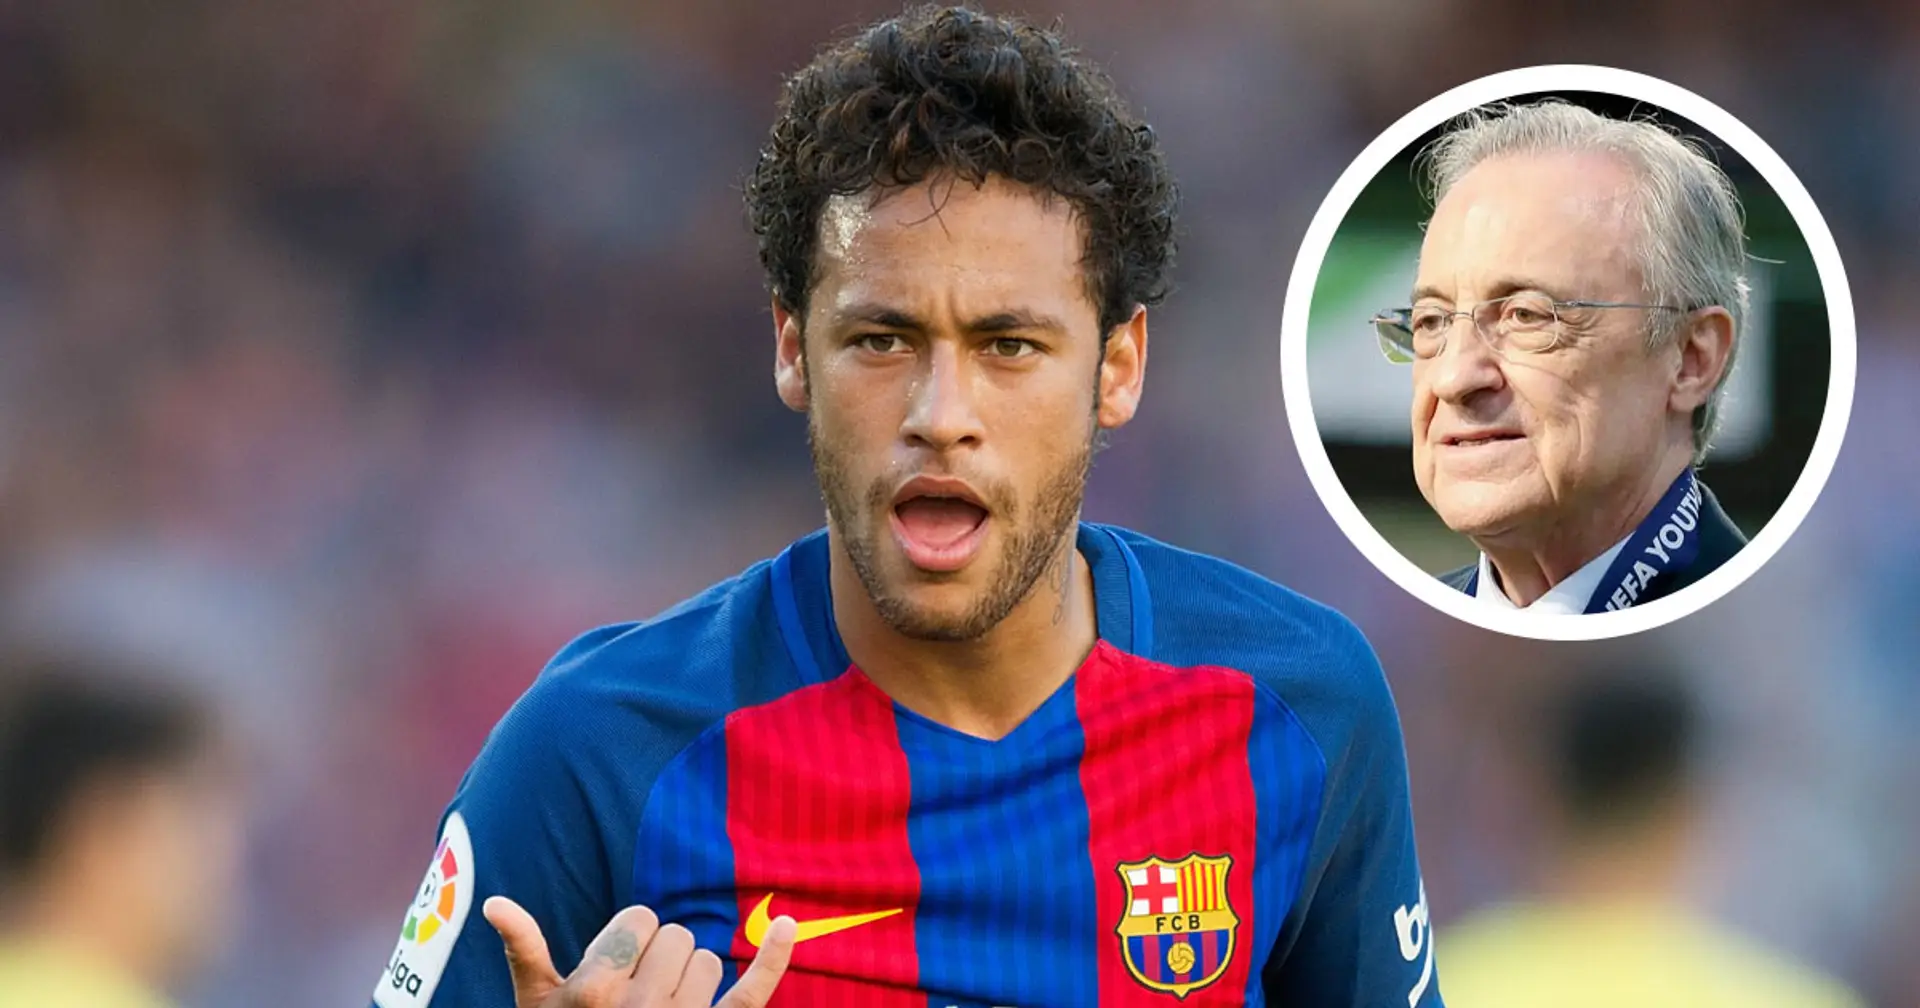 ‘We offered €45m in 2011’: Florentino Perez reveals Real Madrid’s interest in signing Neymar before Barca